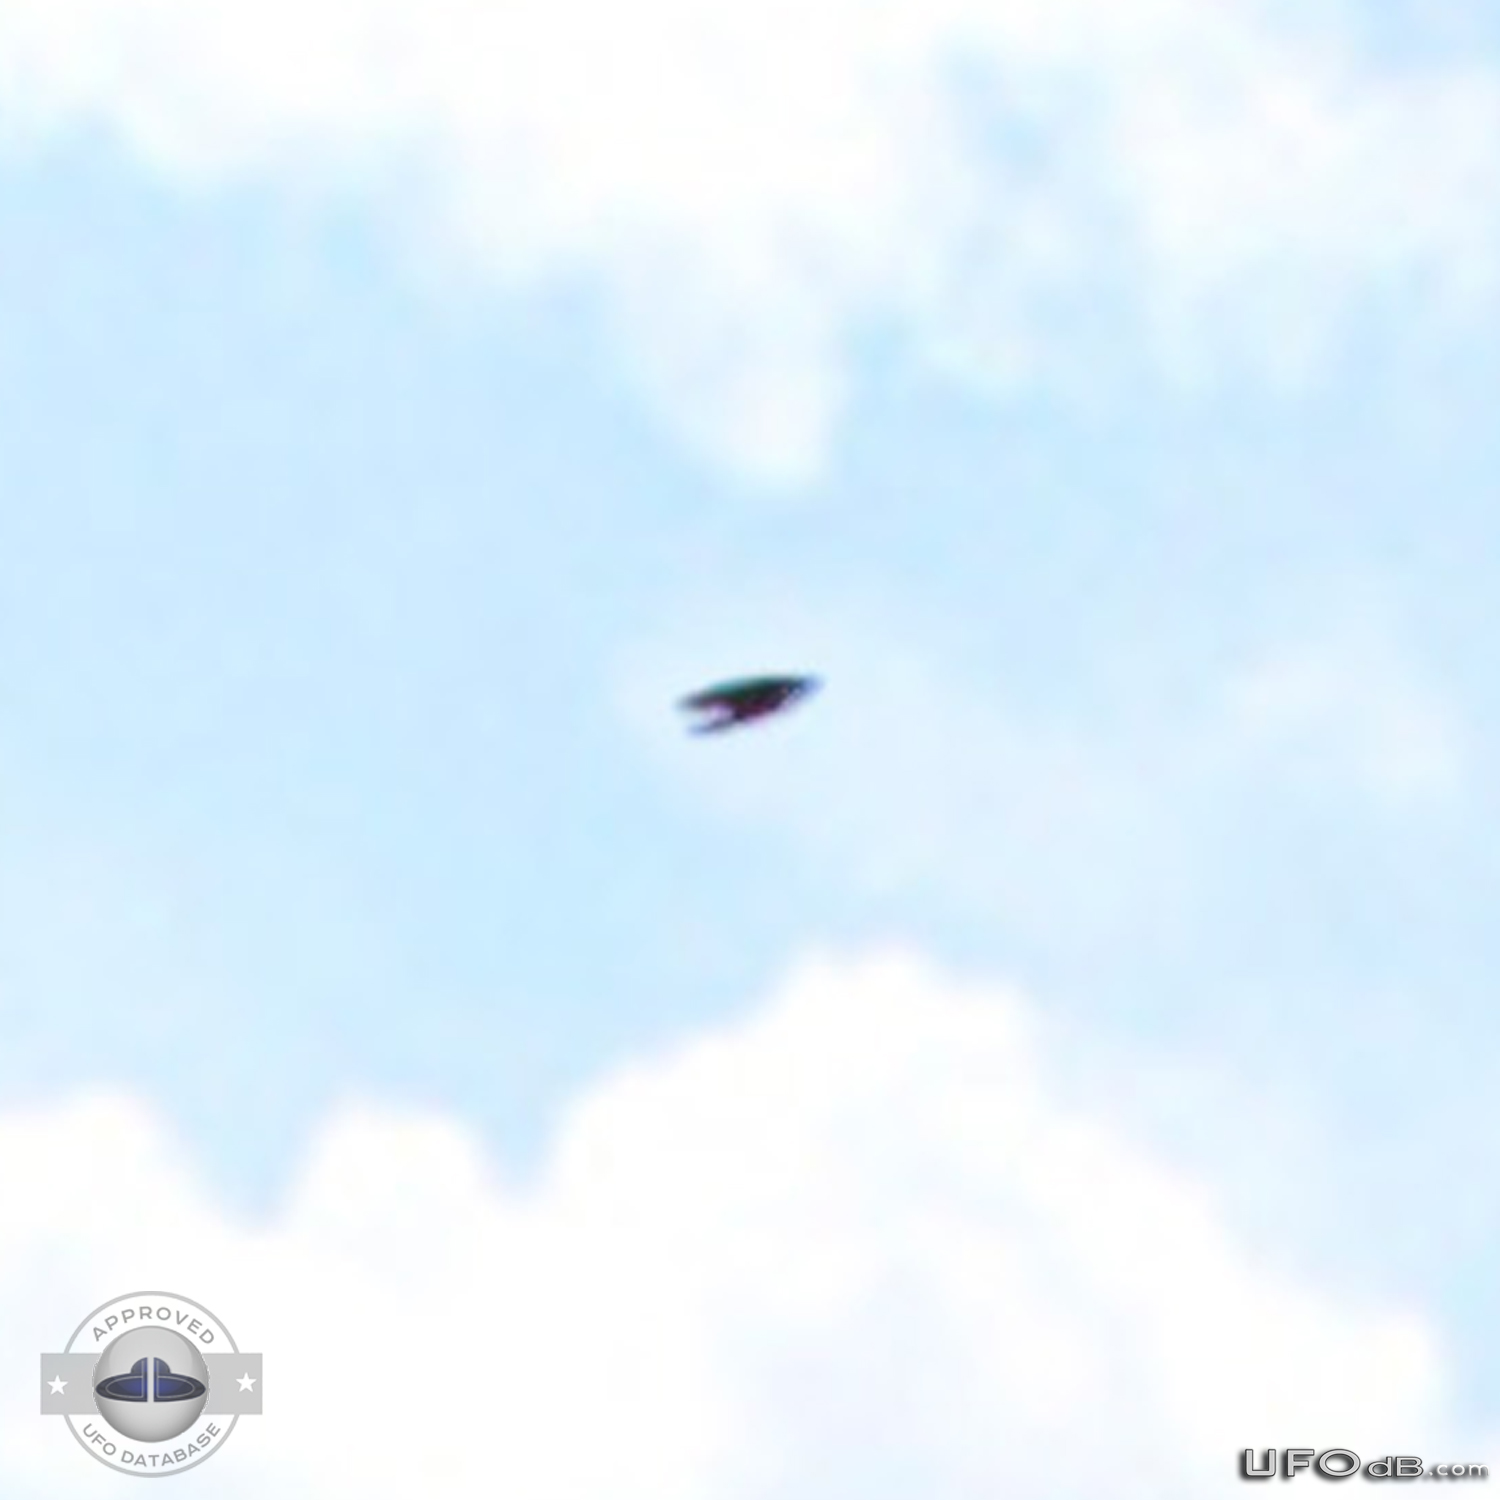 Black Boomerang UFO in the Mountains in Cali, Colombia | January 2011 UFO Picture #245-3